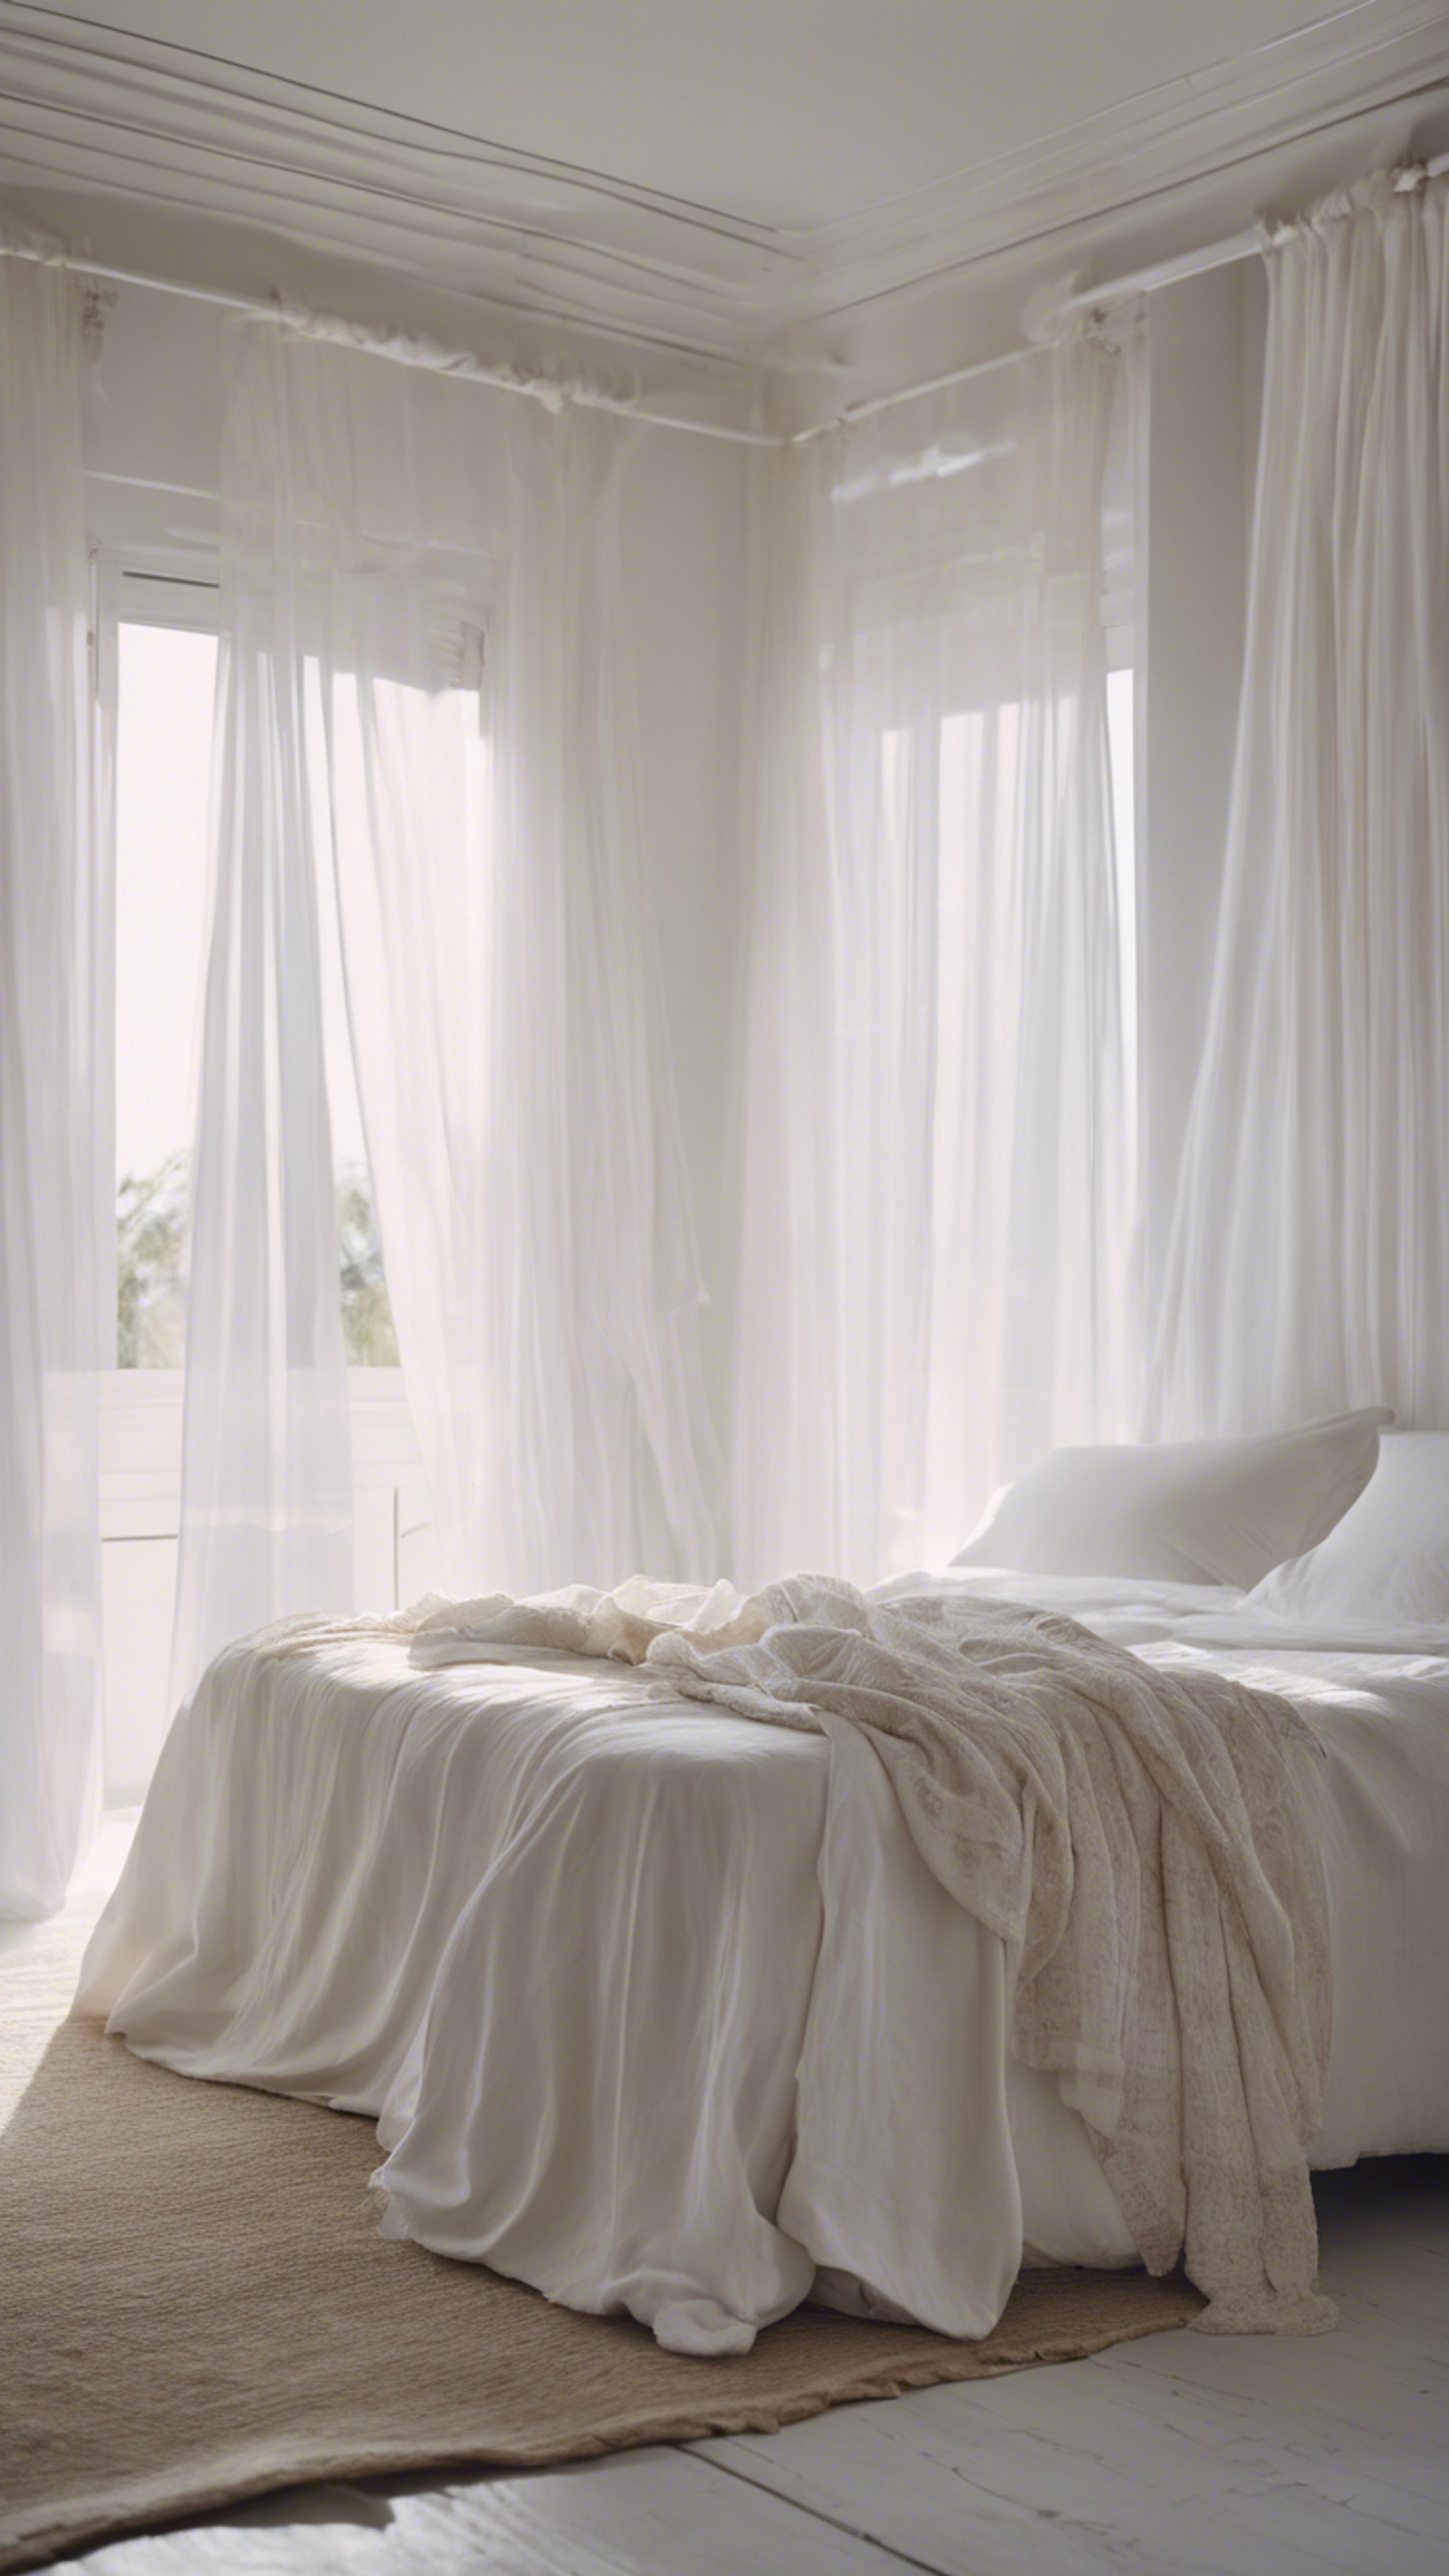 A dreamy white bedroom with sheer curtains blowing in the wind, white bed linens and an array of daylight from the window. Tapéta[01f8a65ac1ab4b5d8d2d]